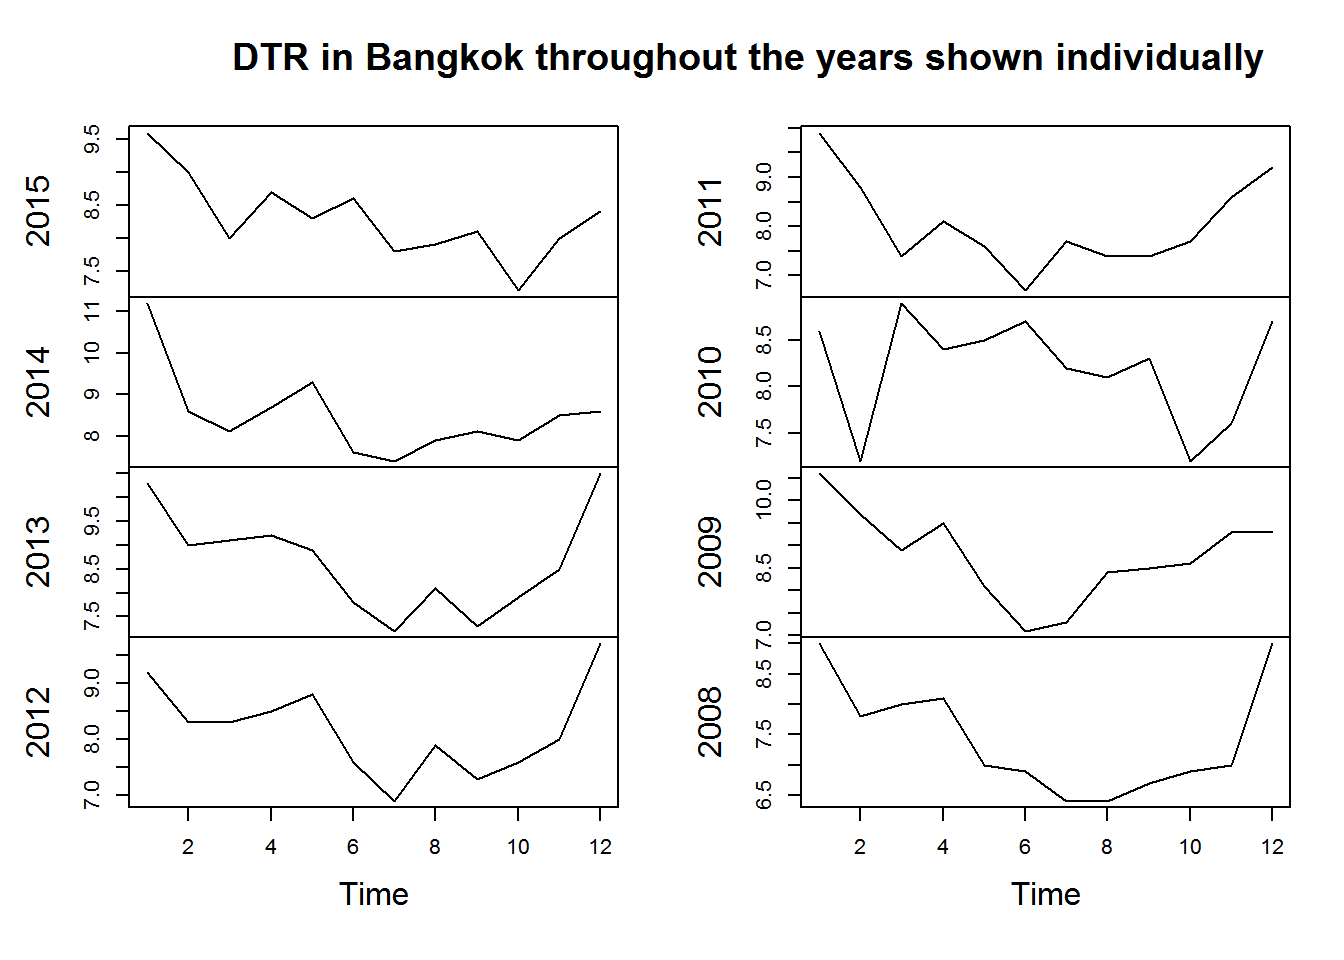 DTR within Bangkok throughout the years put together shown individually.